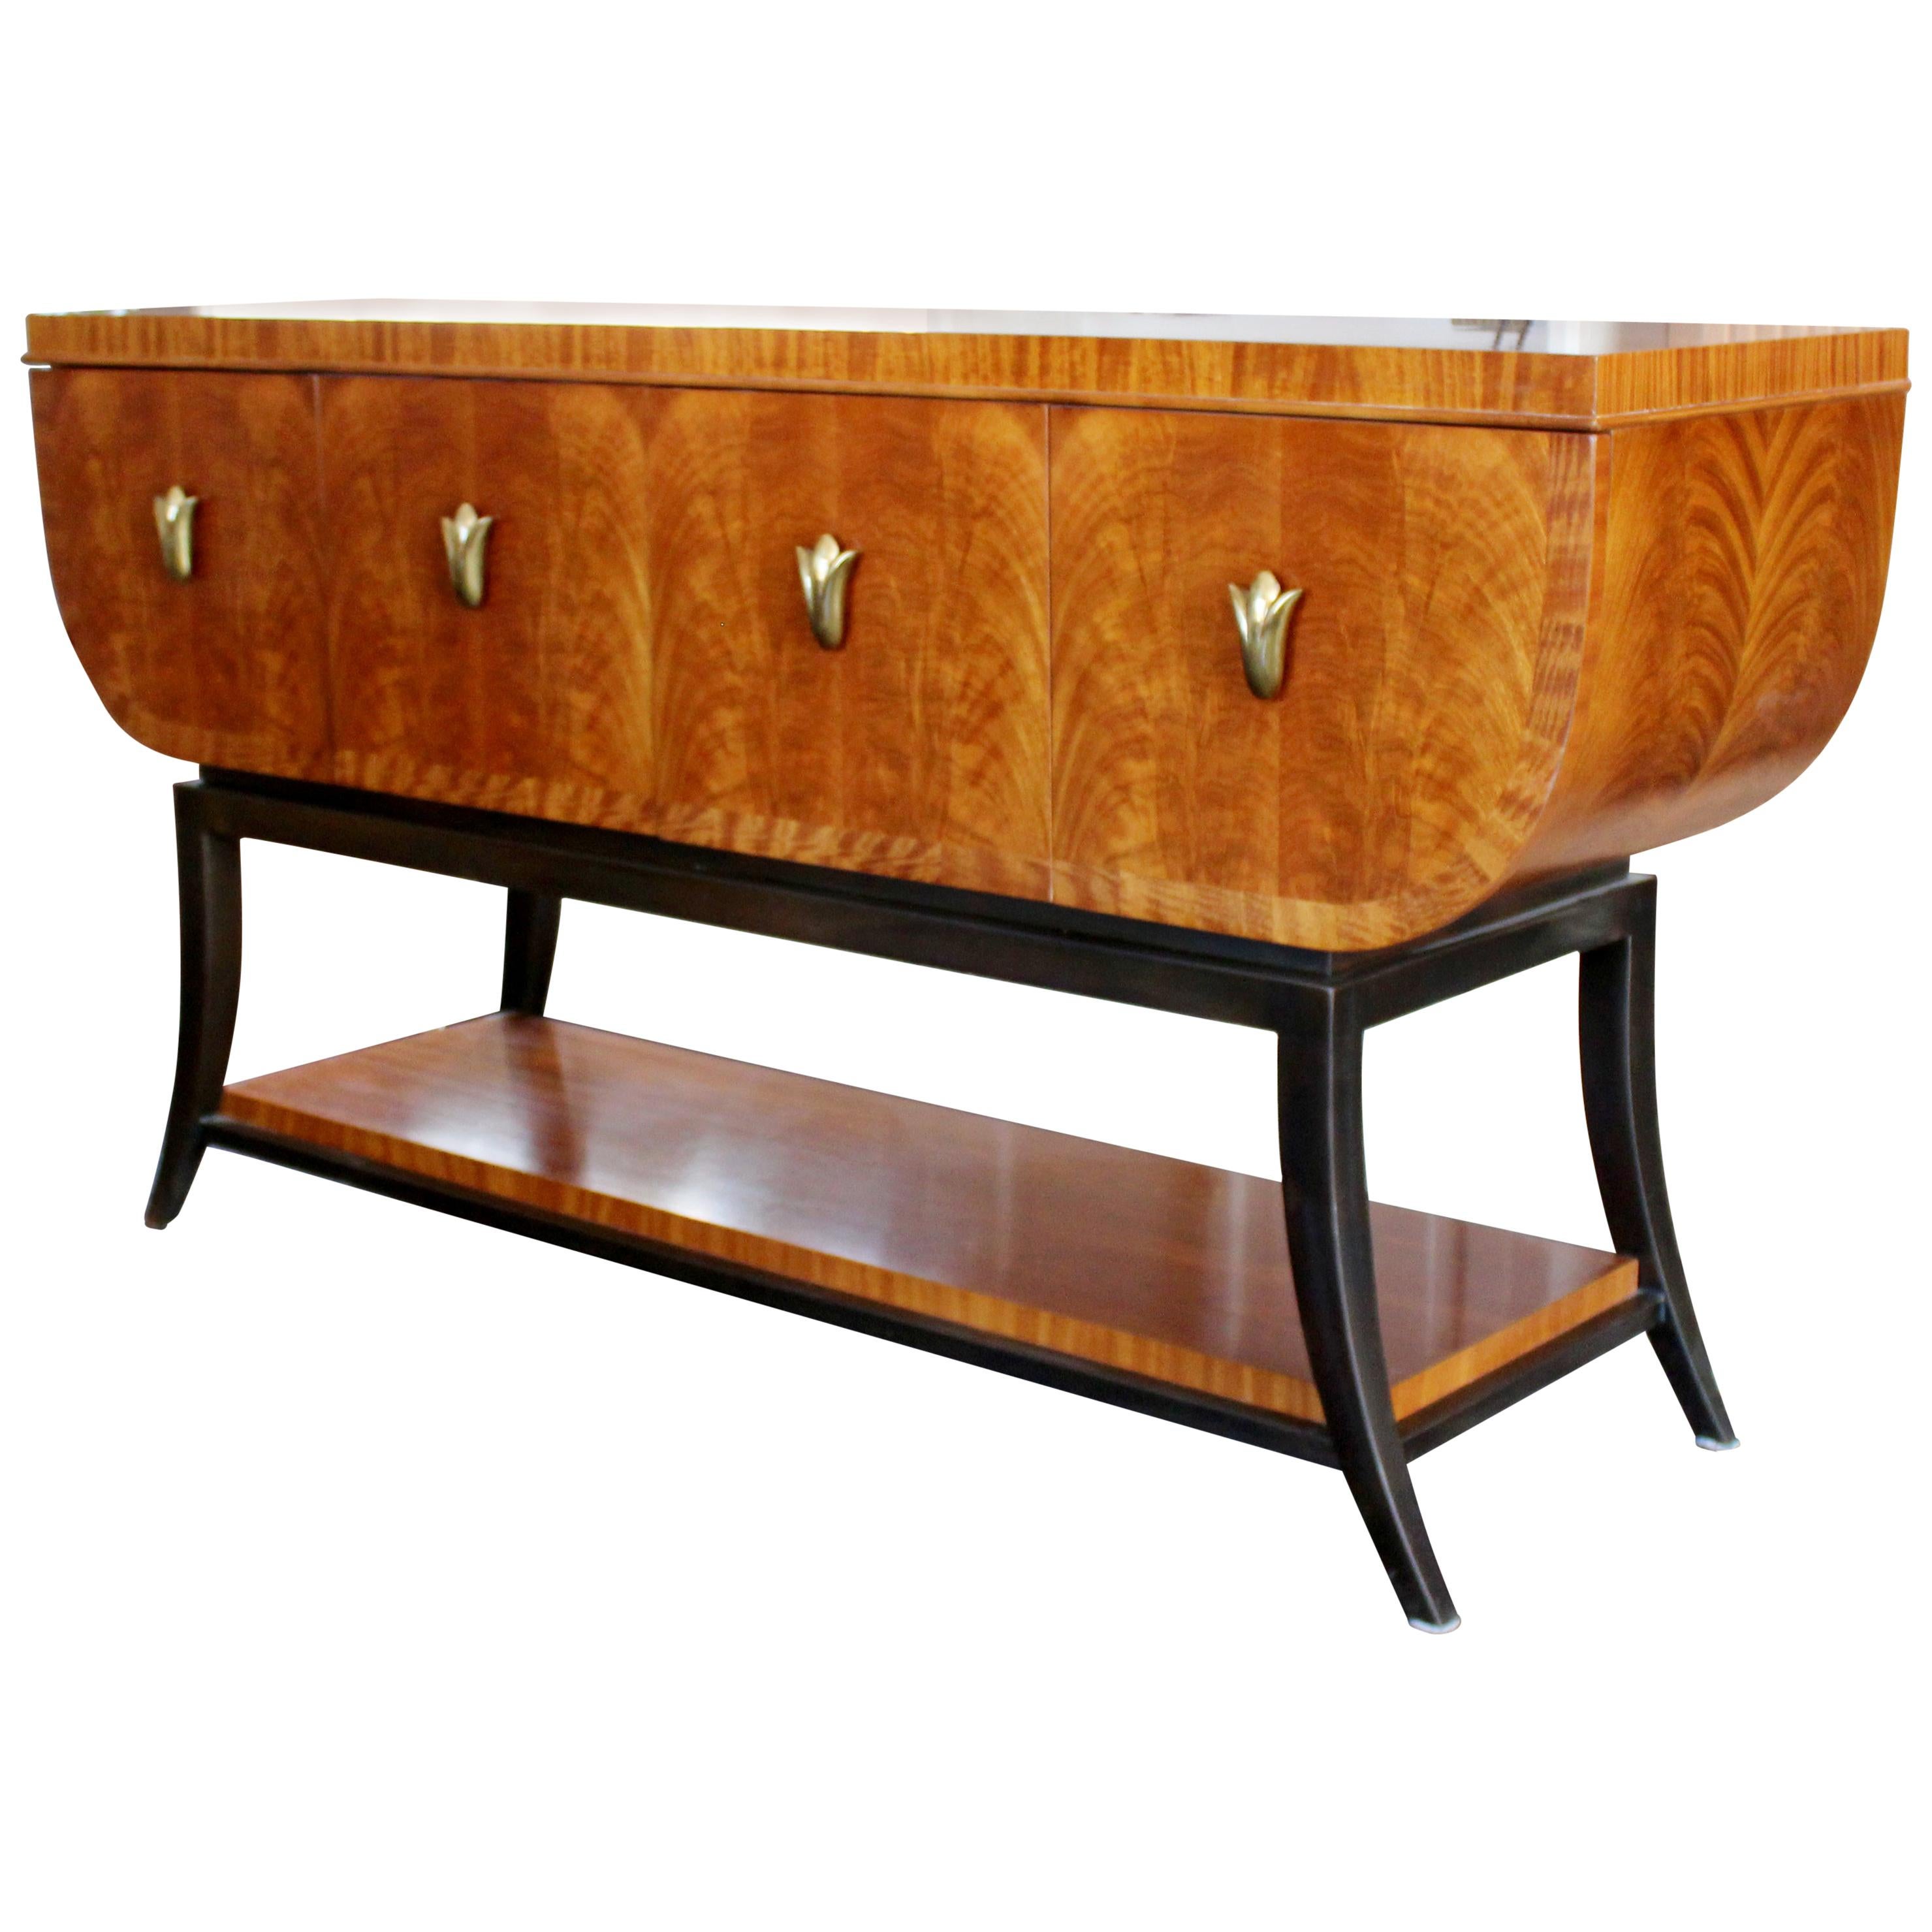 Contemporary Deco Style Curved Burl Wood and Brass Sideboard Credenza Henredon